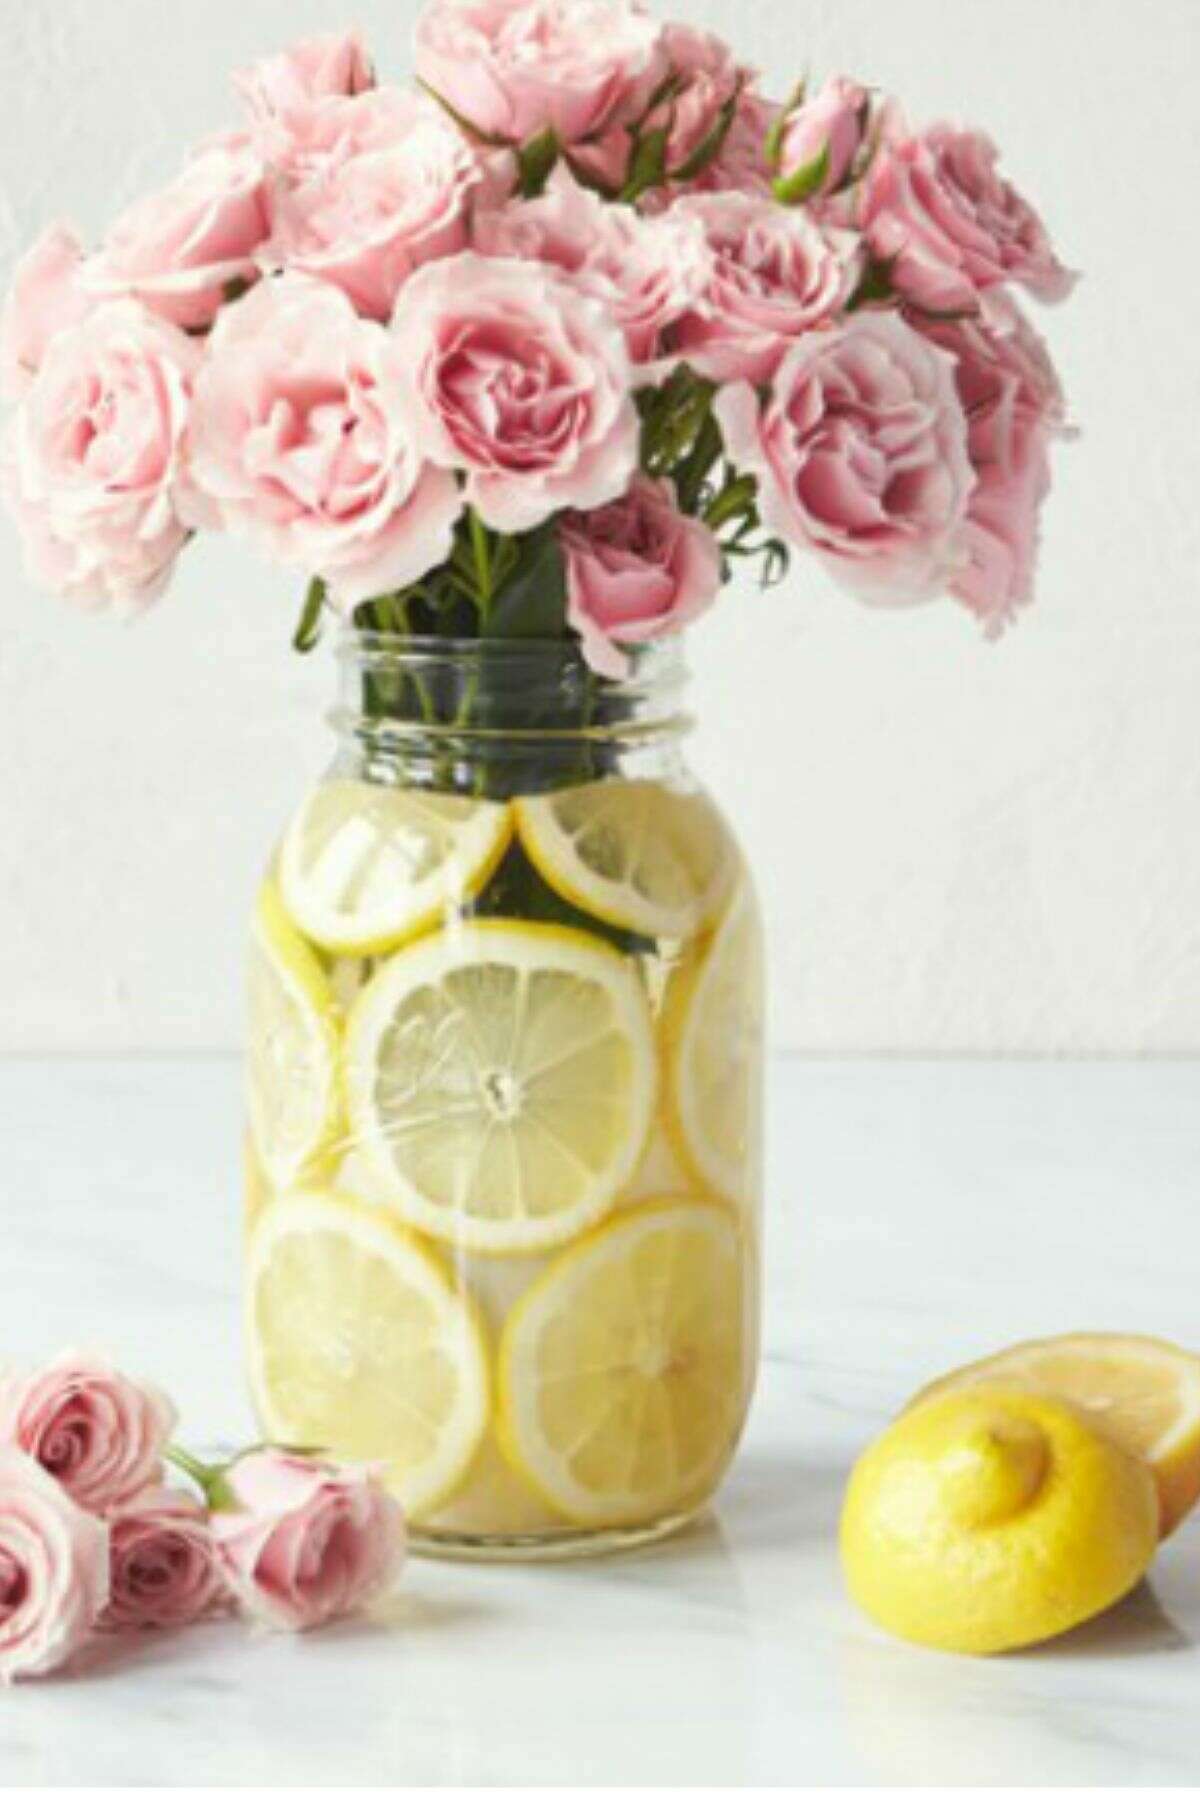 Lemon Lined Centerpiece: This easy DIY project will take your table setting to the next level. Bonus: It smells as great as it looks. Get the tutorial at Rue Now.